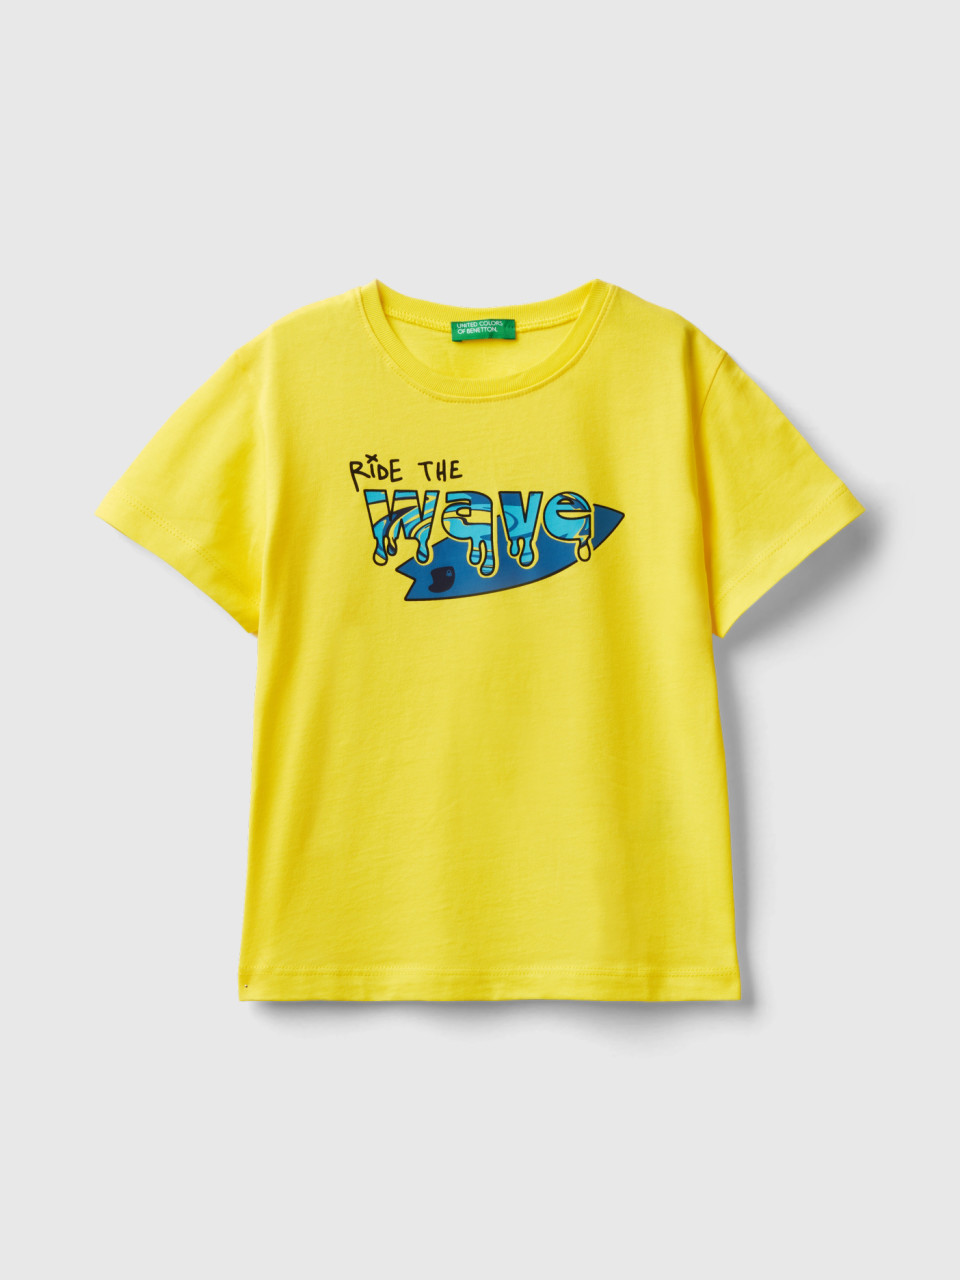 Benetton, T-shirt With Neon Details, Yellow, Kids